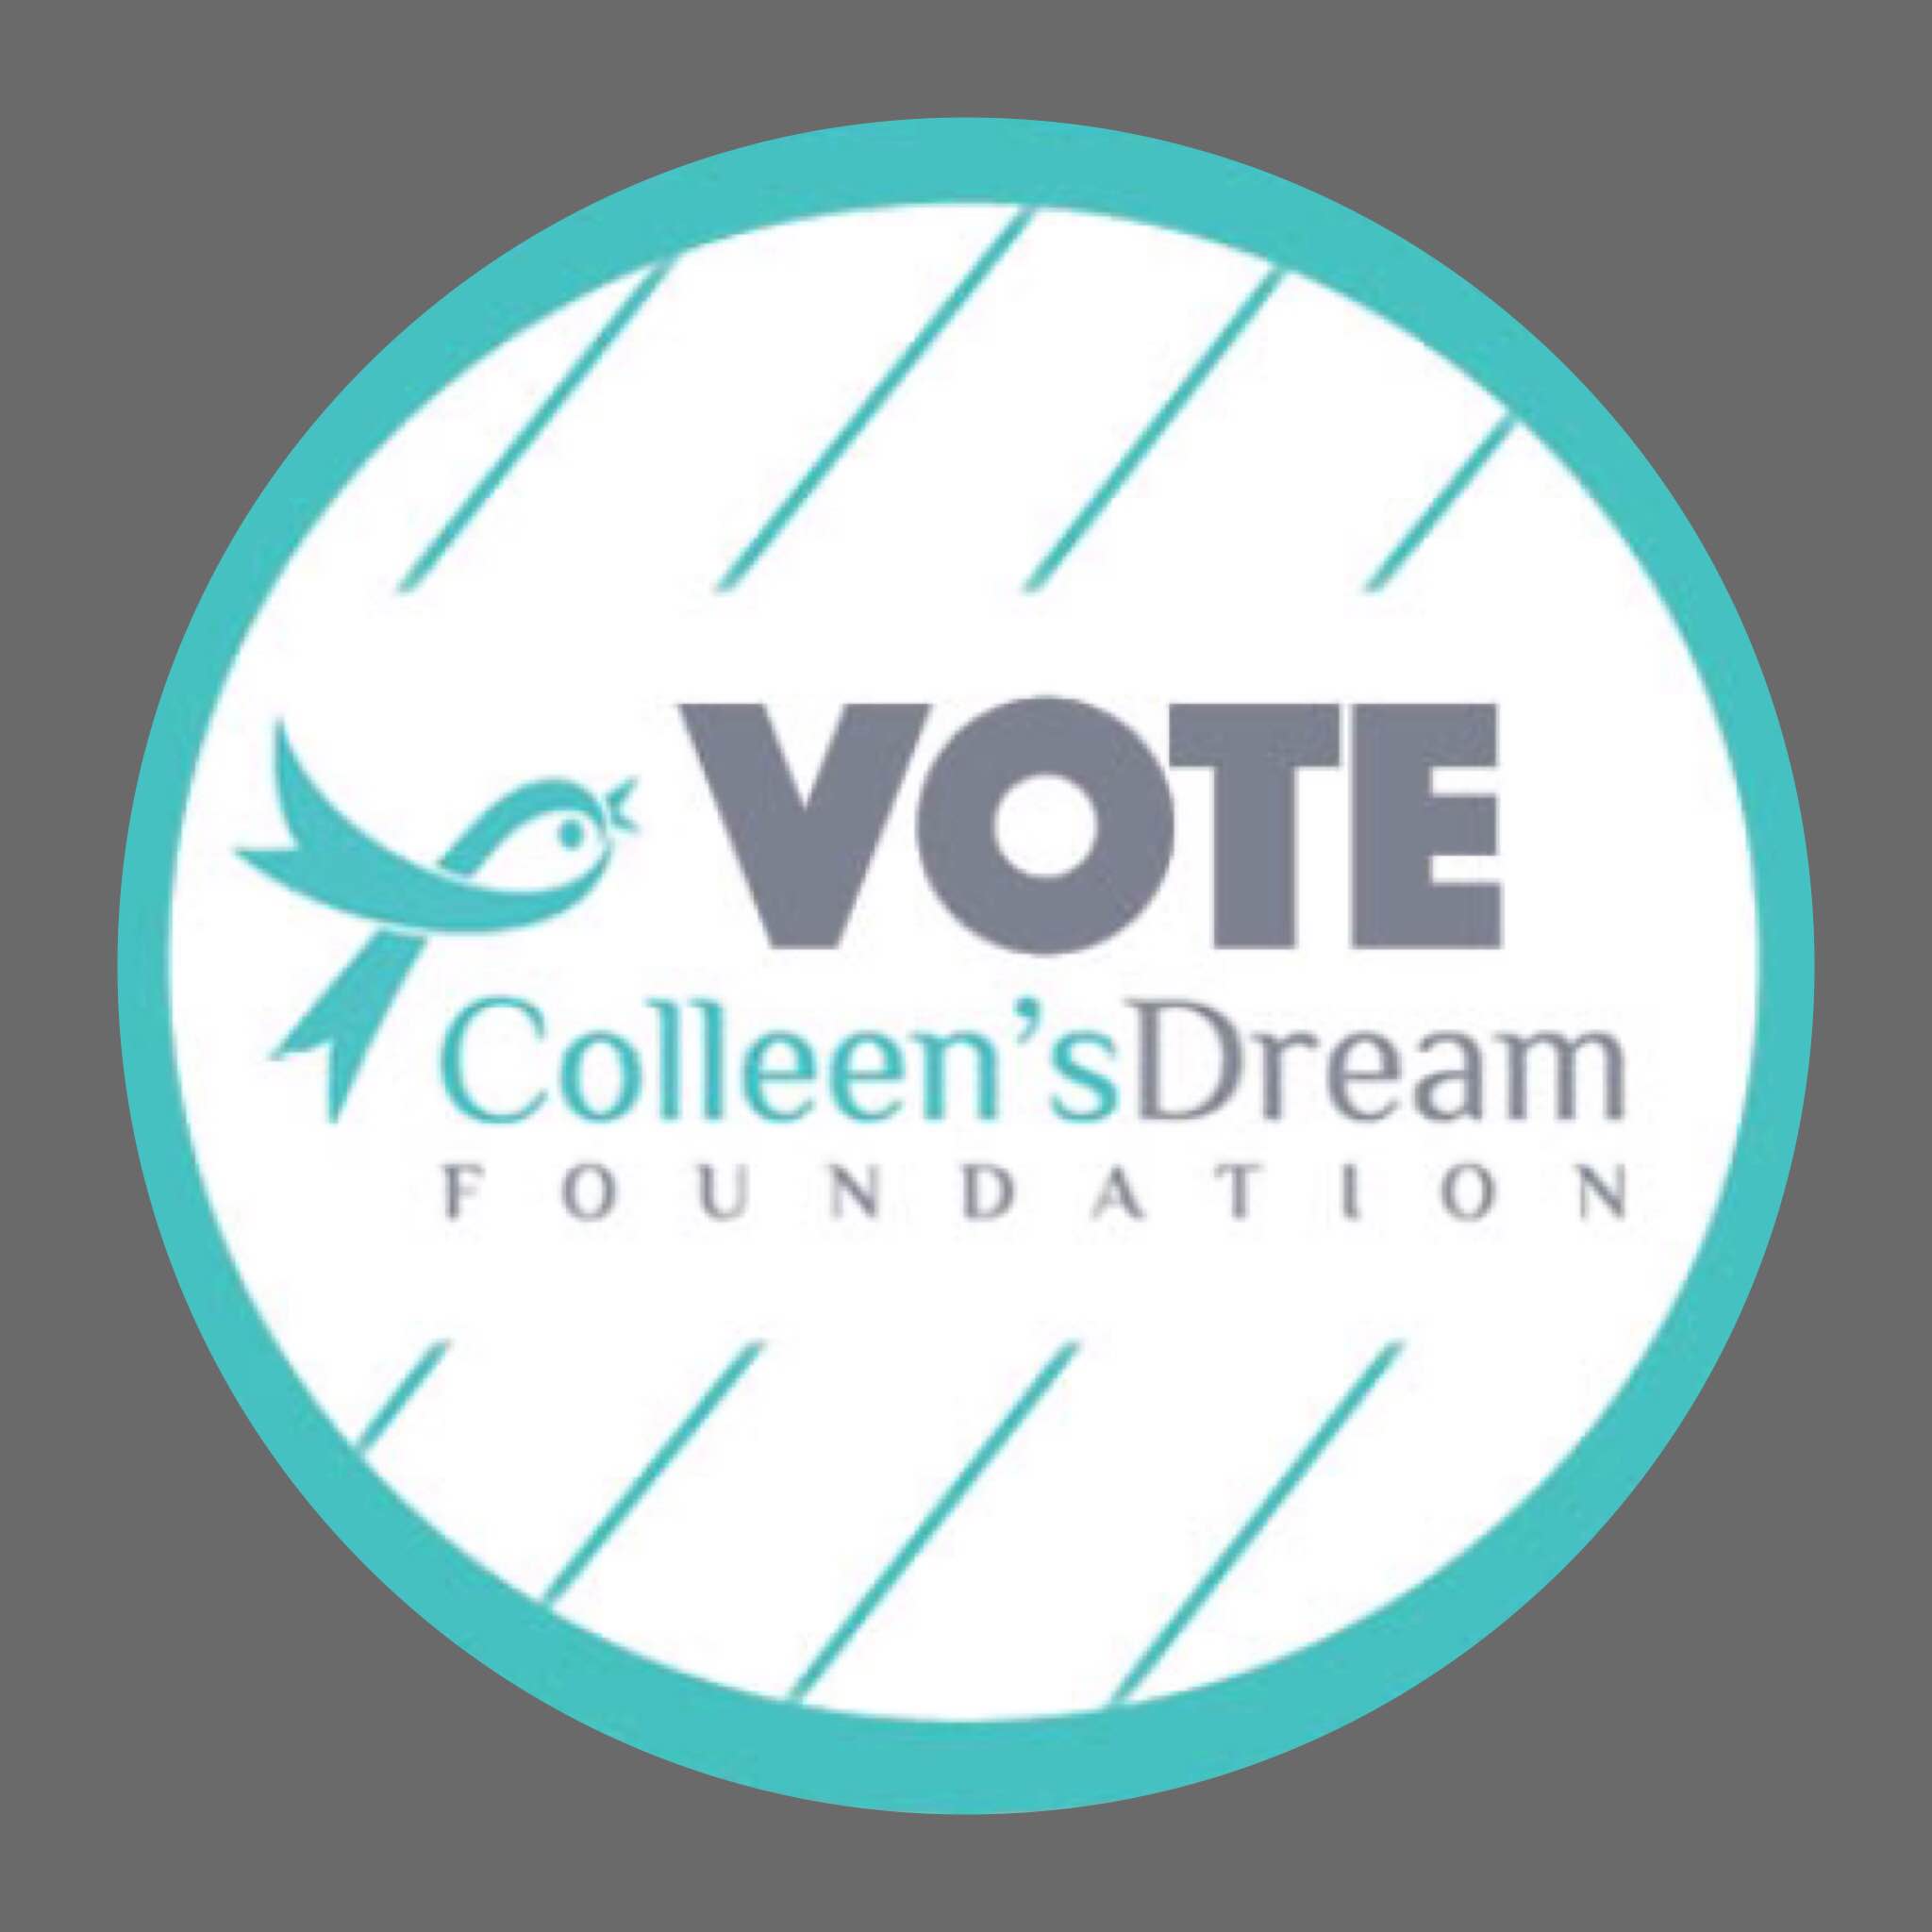 Vote coleen's dream foundation, an ovarian cancer nonprofit.